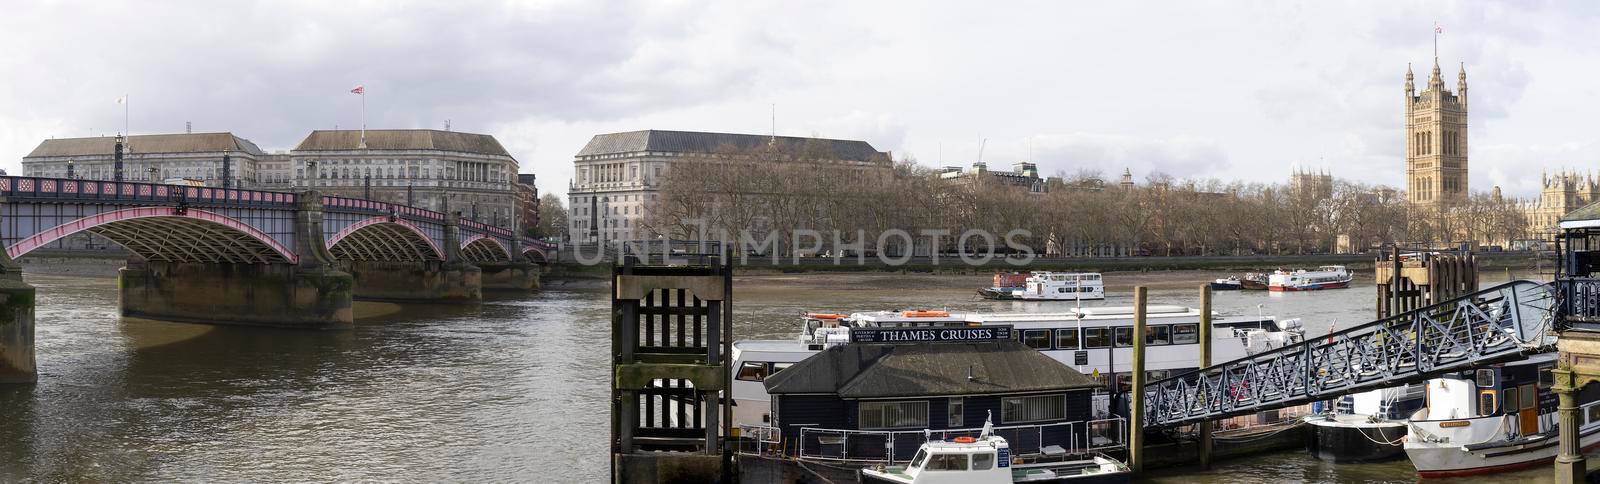 London / England - 03-06-2017 : View over the Thames from Lambeth Place showing Lambeth Bridge, MI5 Security Service Department for Environment and Houses of Parliament by LeoniekvanderVliet